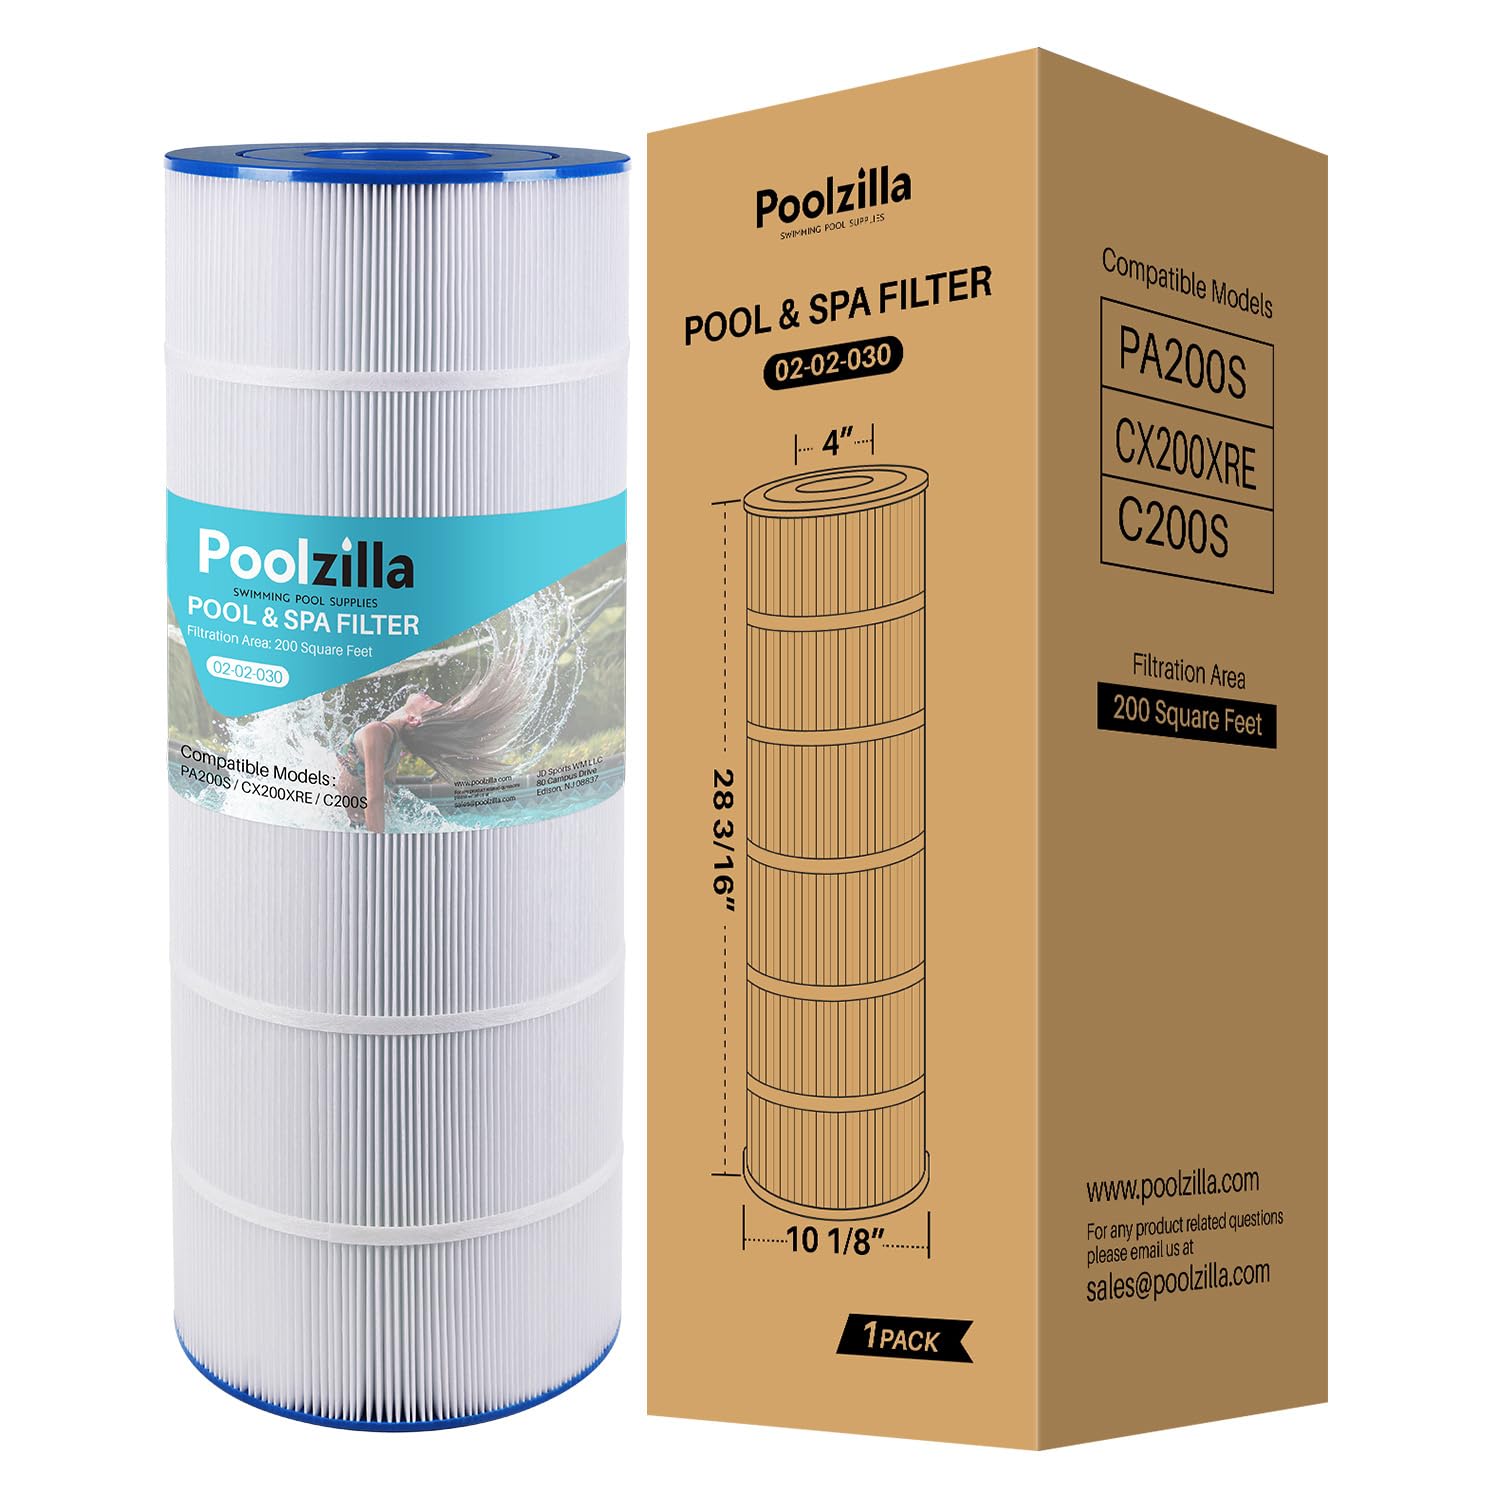 Poolzilla Replacement Pool Filter for PLFPA200S, Hayward CX200-XRE, SwimClear C200S, CS200E, Unicel C-9442, Spa-Daddy SD-01334, PA200S